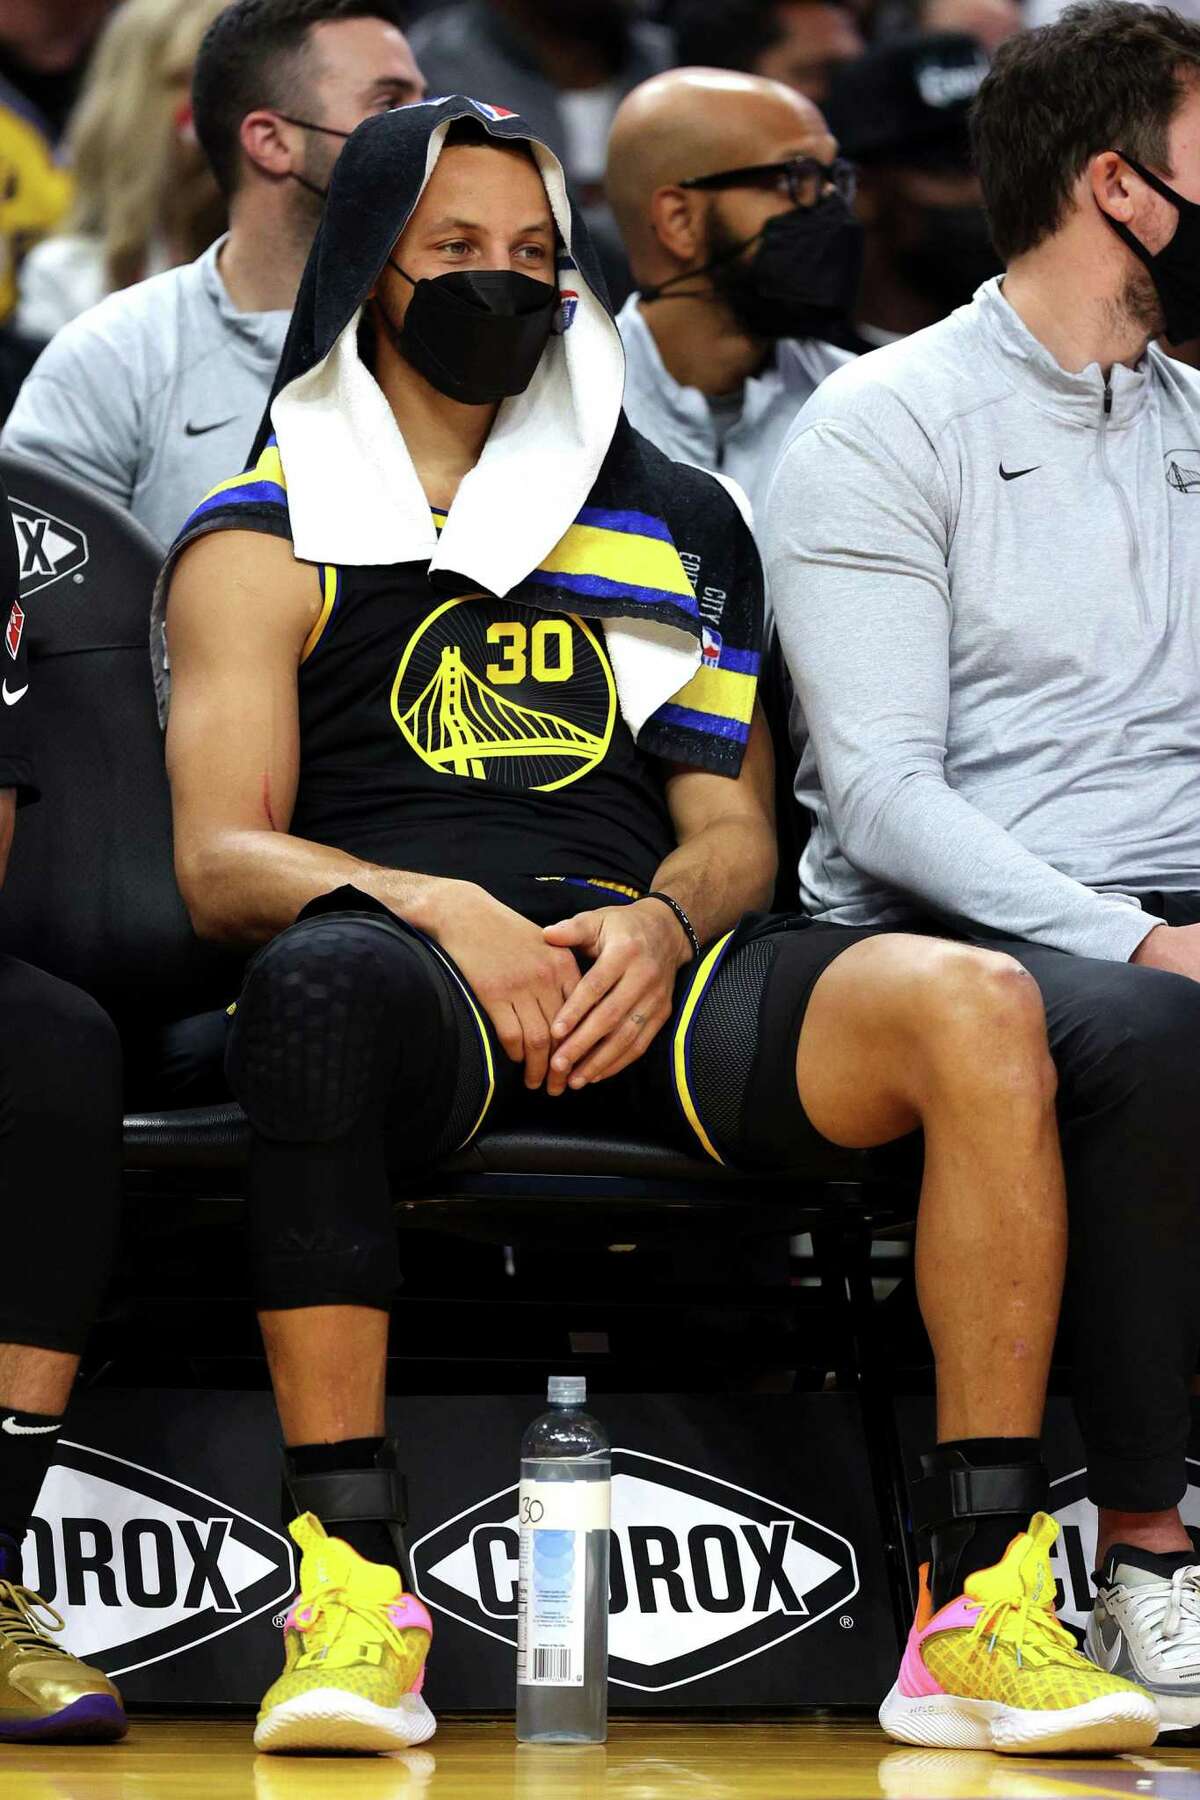 SAN FRANCISCO, CALIFORNIA - NOVEMBER 26: Stephen Curry #30 of the Golden State Warriors looks on from the bench during the first half of the game against the Portland Trail Blazers at Chase Center on November 26, 2021 in San Francisco, California. NOTE TO USER: User expressly acknowledges and agrees that, by downloading and or using this photograph, User is consenting to the terms and conditions of the Getty Images License Agreement. (Photo by Ezra Shaw/Getty Images)